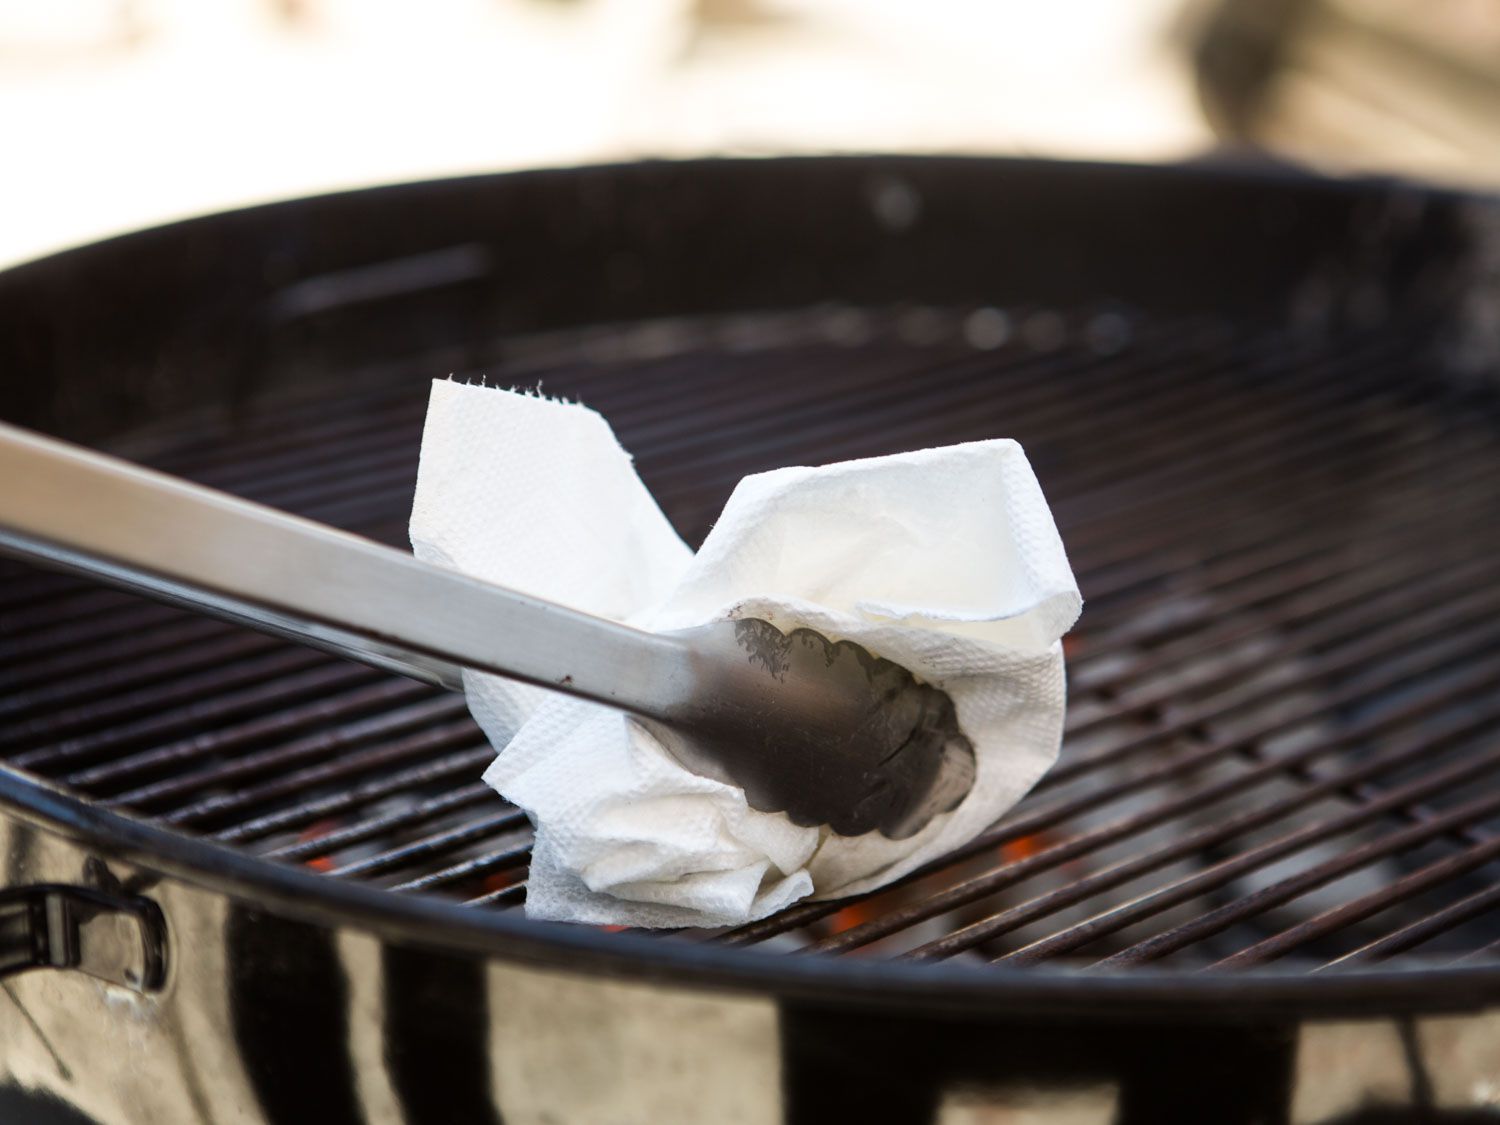 Oiling the grates of a charcoal grill using tongs and a paper towel dipped in neutral oil.